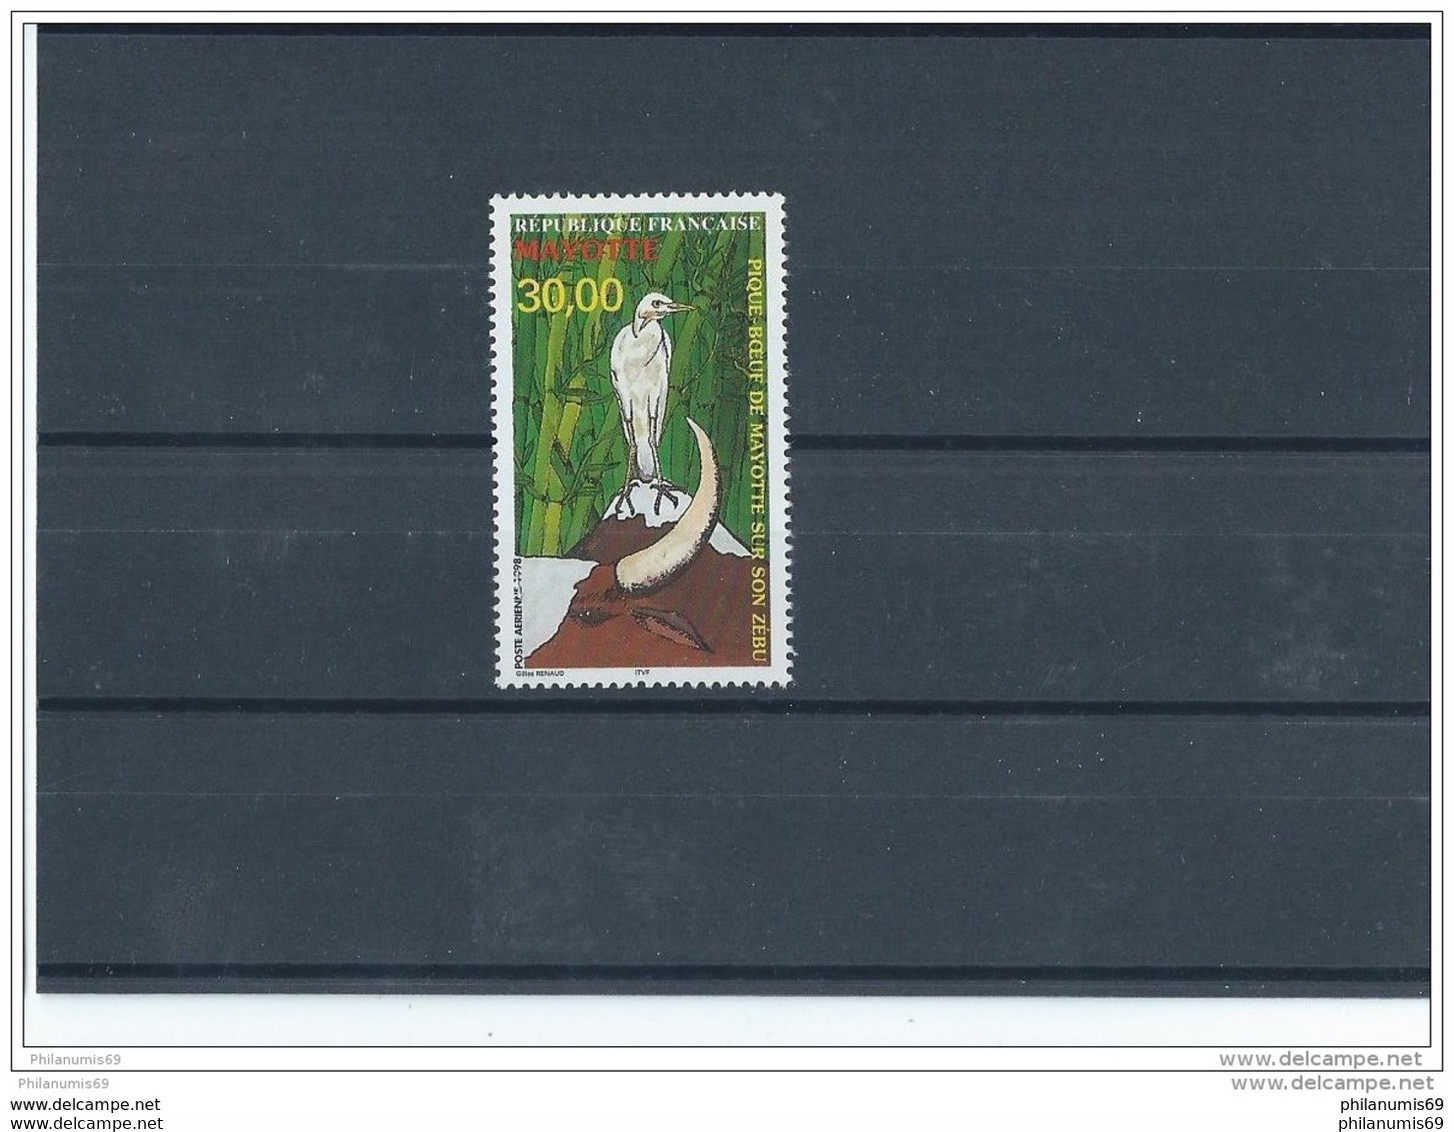 MAYOTTE 1998 - YT PA N° 3 NEUF SANS CHARNIERE ** (MNH) GOMME D'ORIGINE LUXE - Airmail